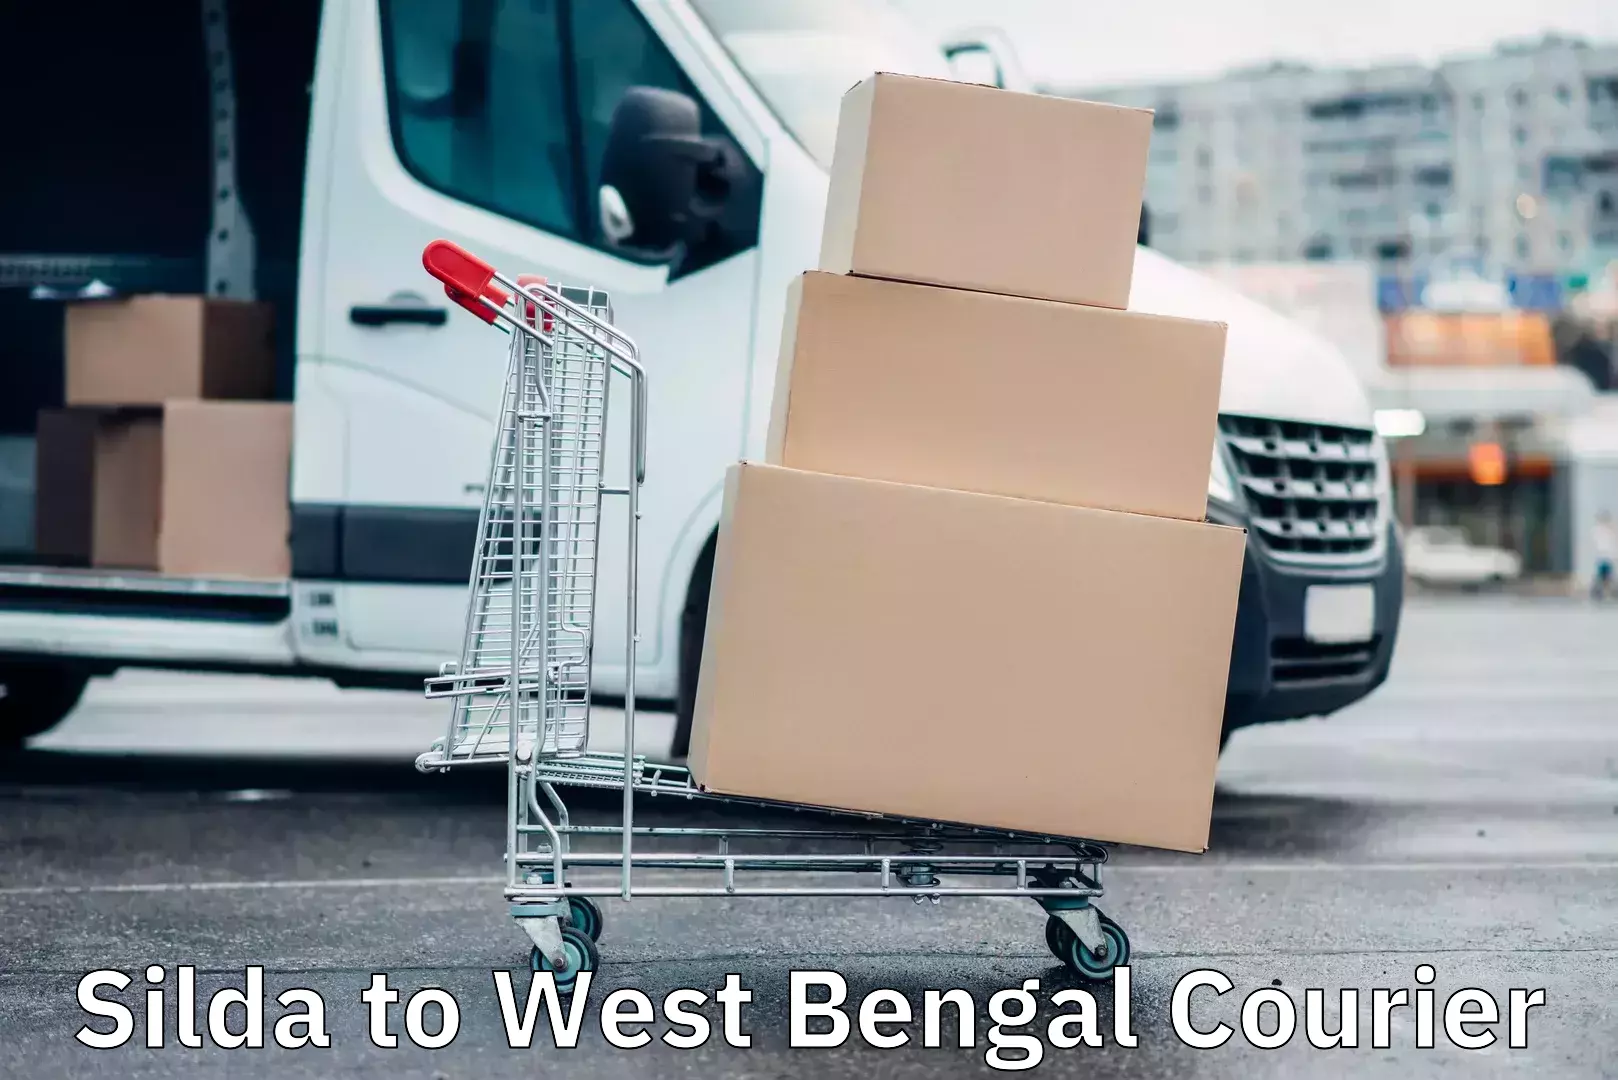 User-friendly courier app Silda to West Bengal